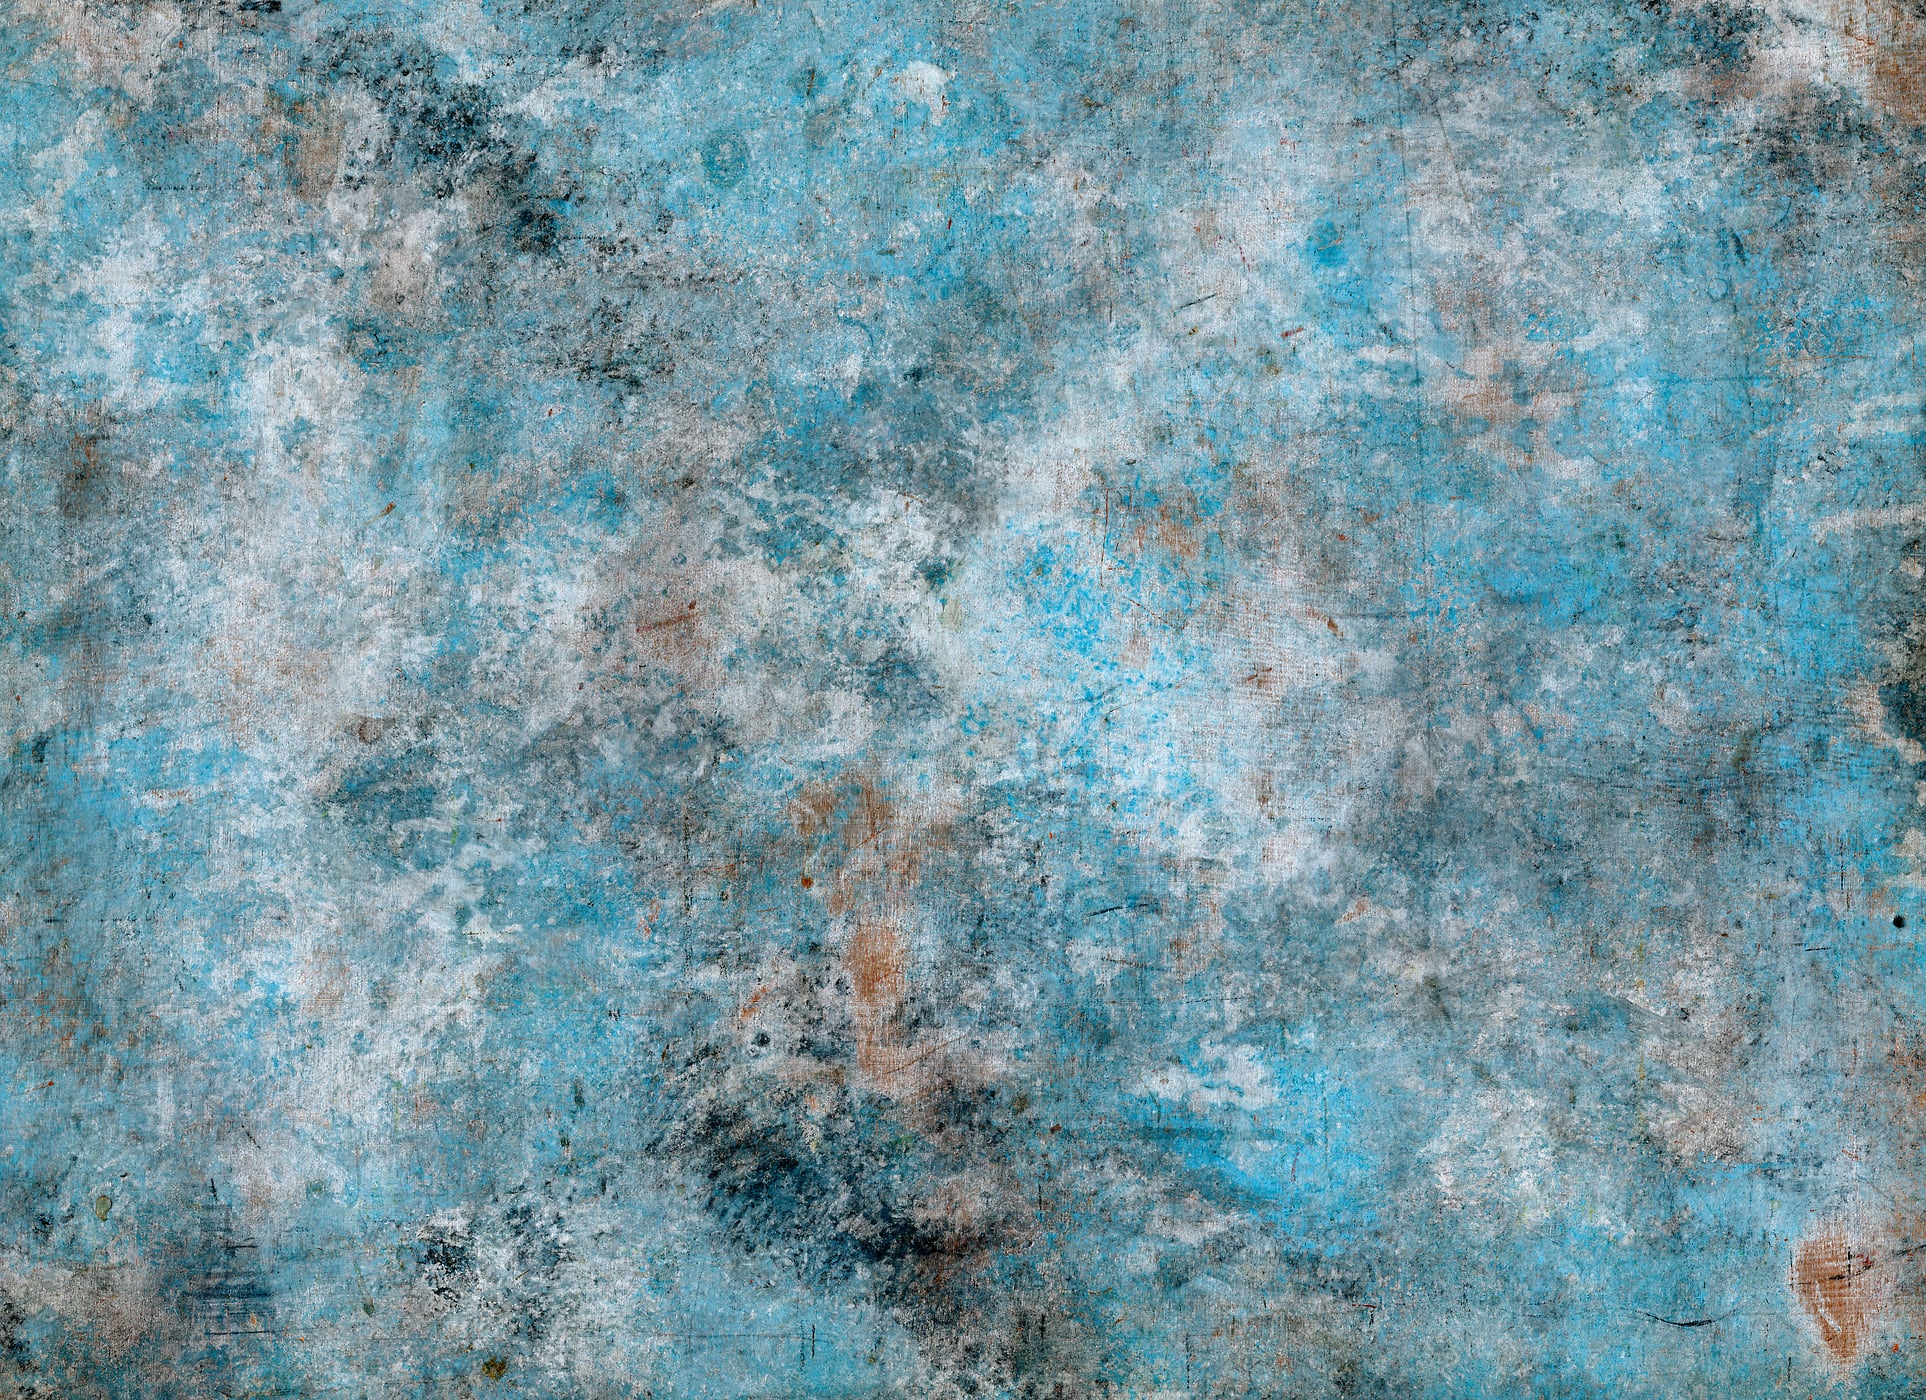 2,941 megapixels! An ultra-high-resolution texture photo file of a rich blue sponge effect; gigapixel photograph created by David Lineton.